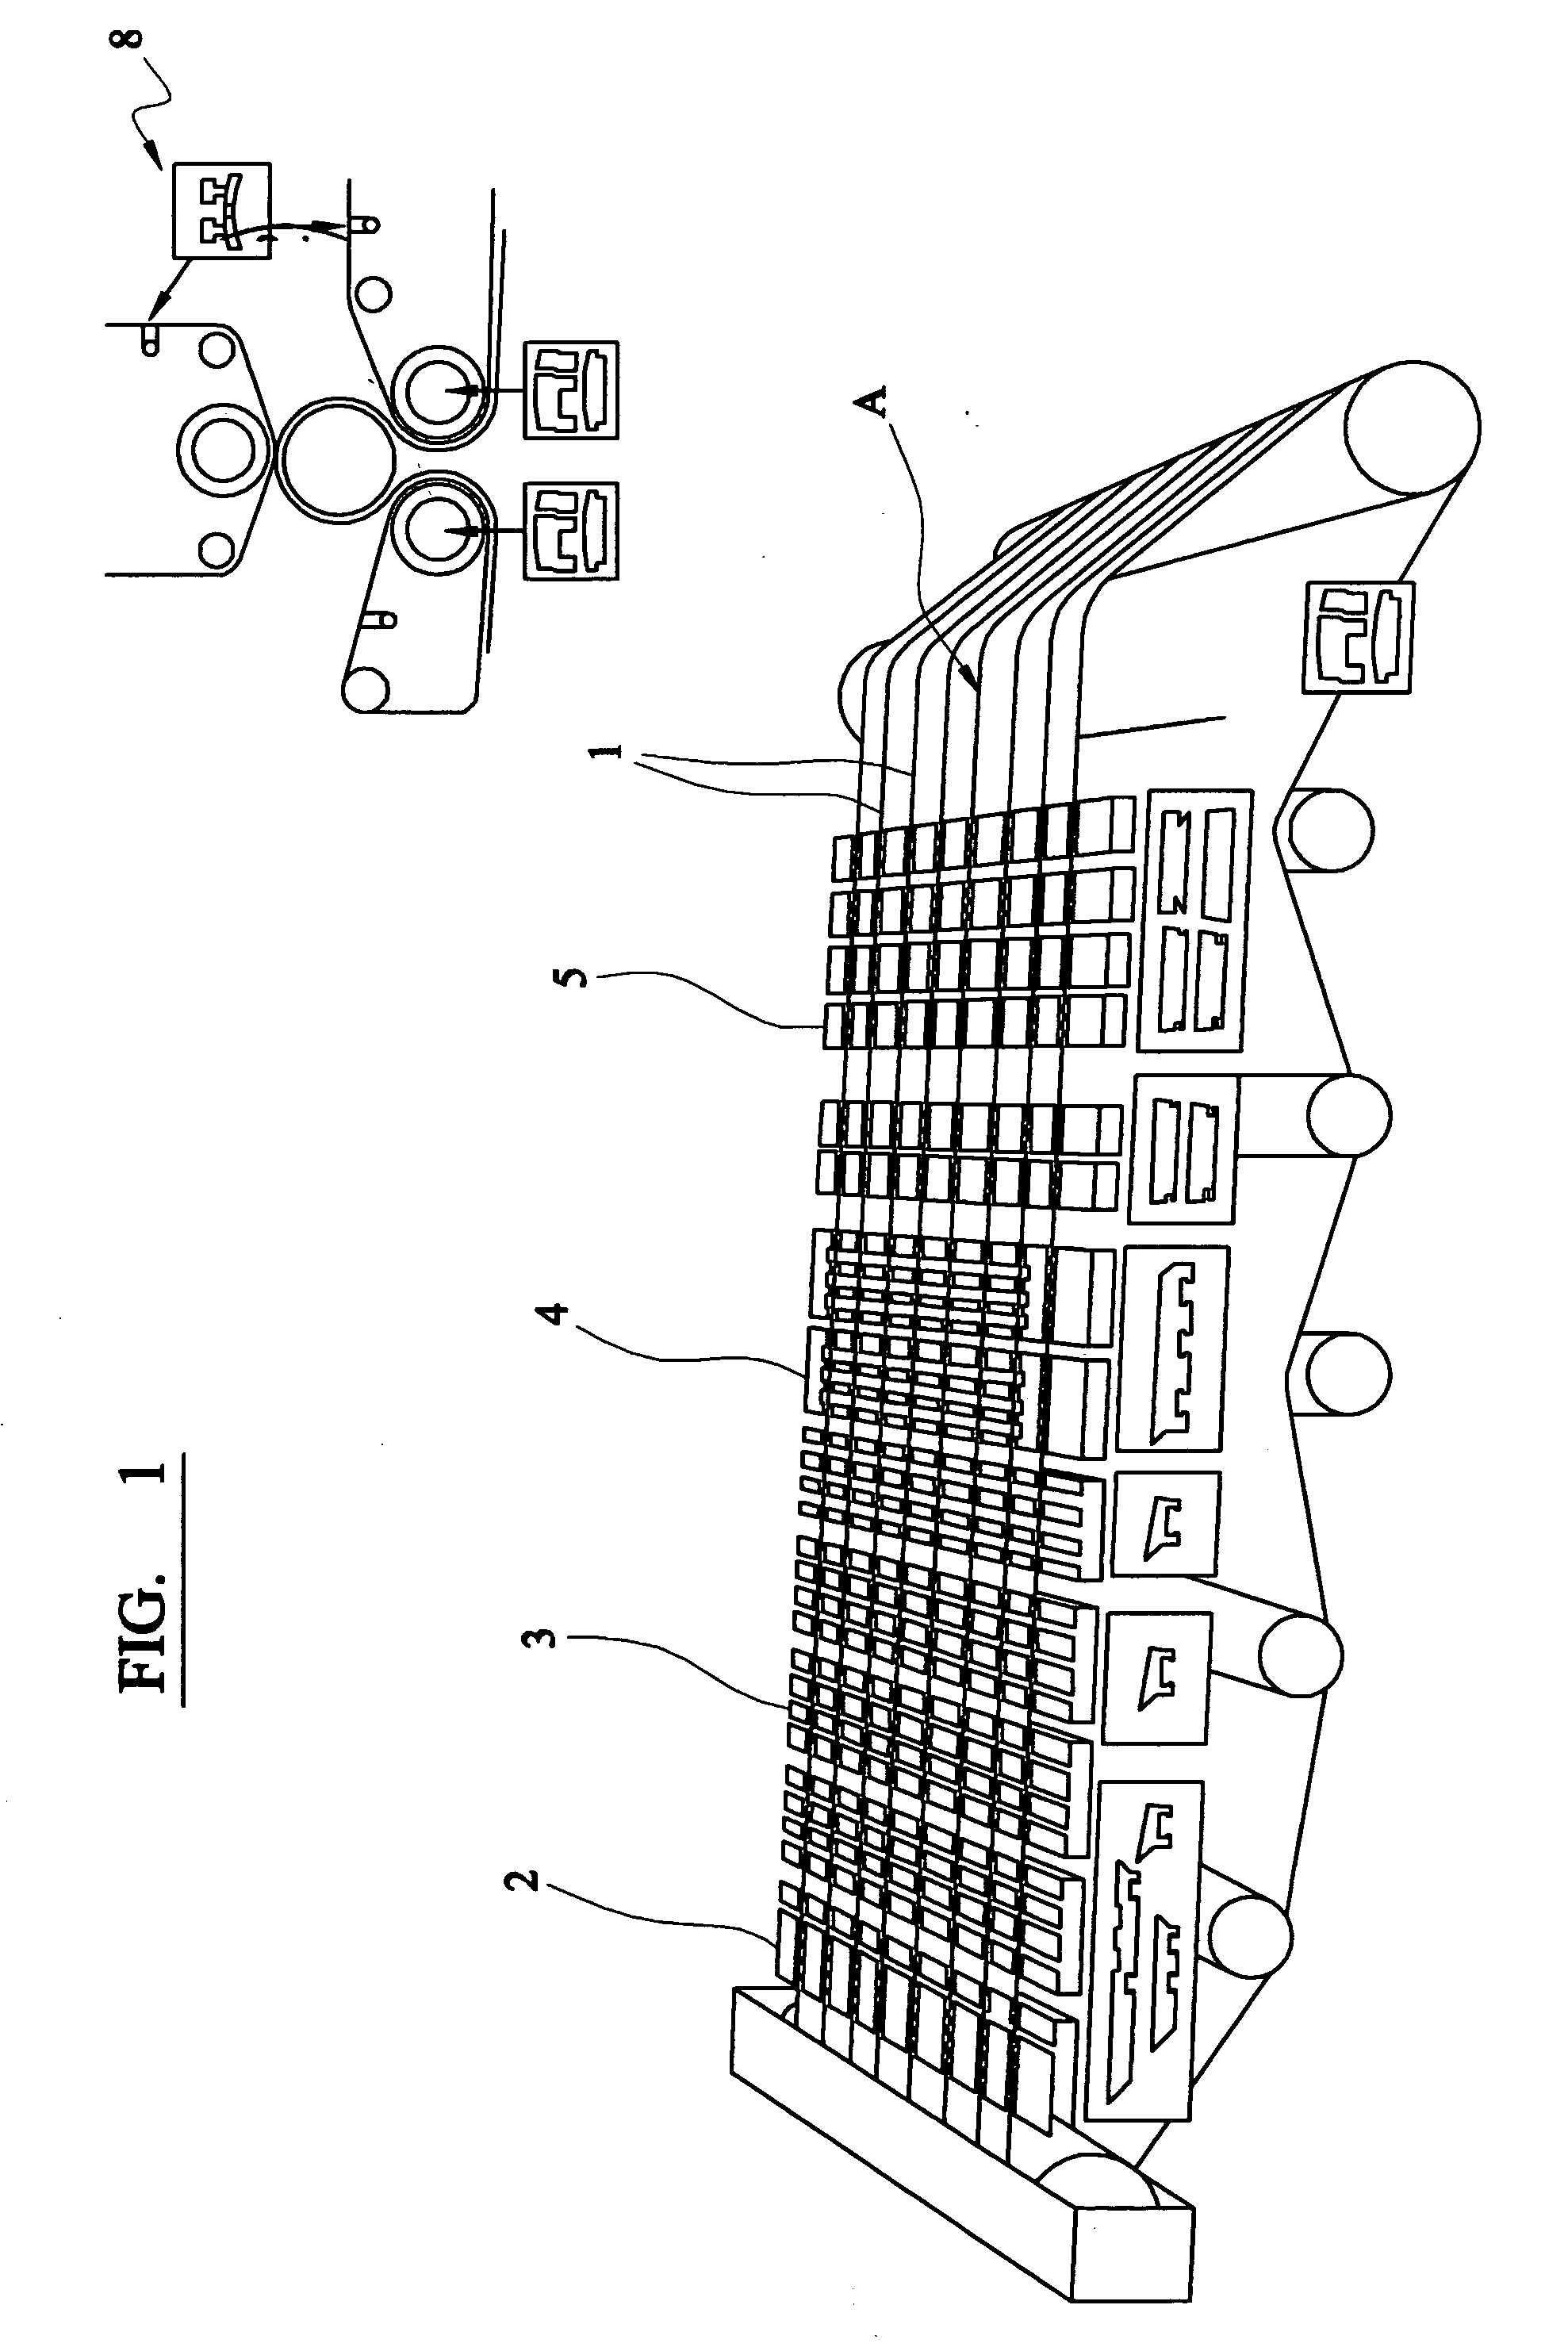 Papermaking apparatus